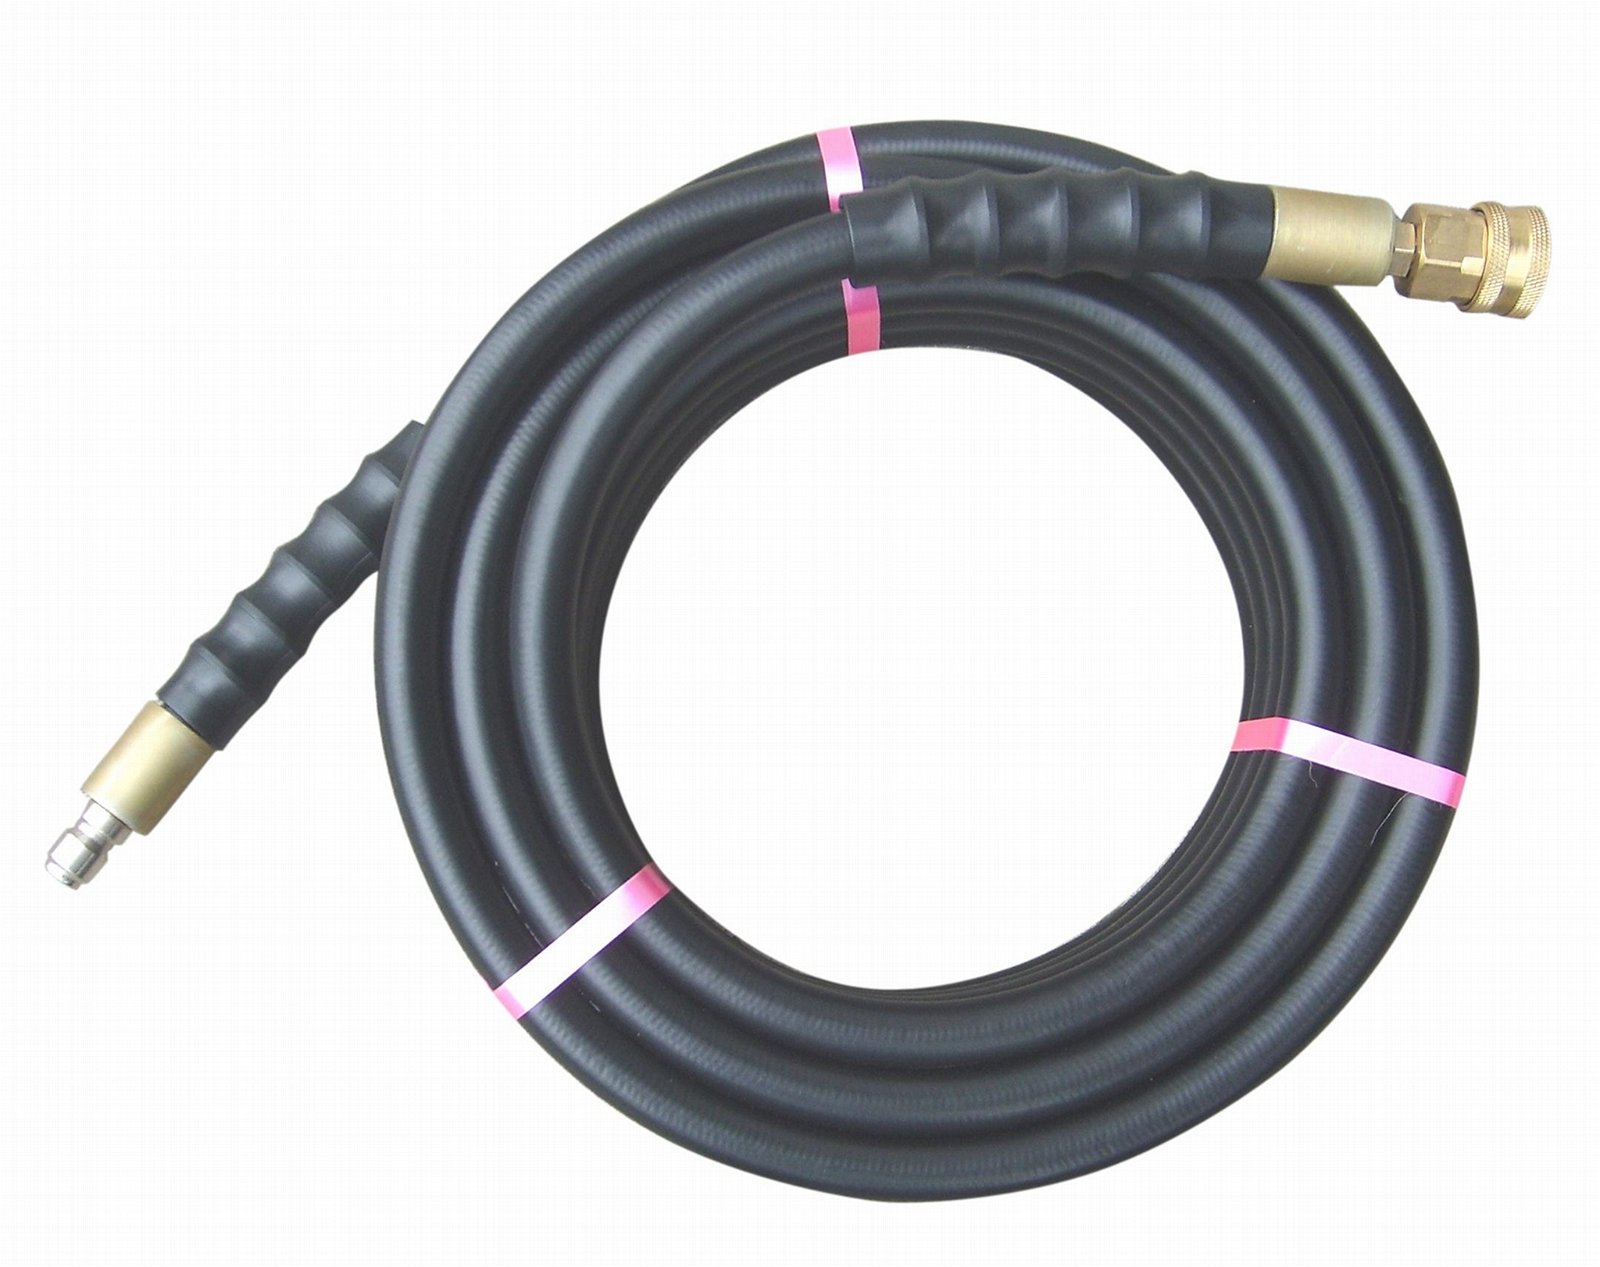 Black high pressure washing car equipment hose with quick connect fittings  5